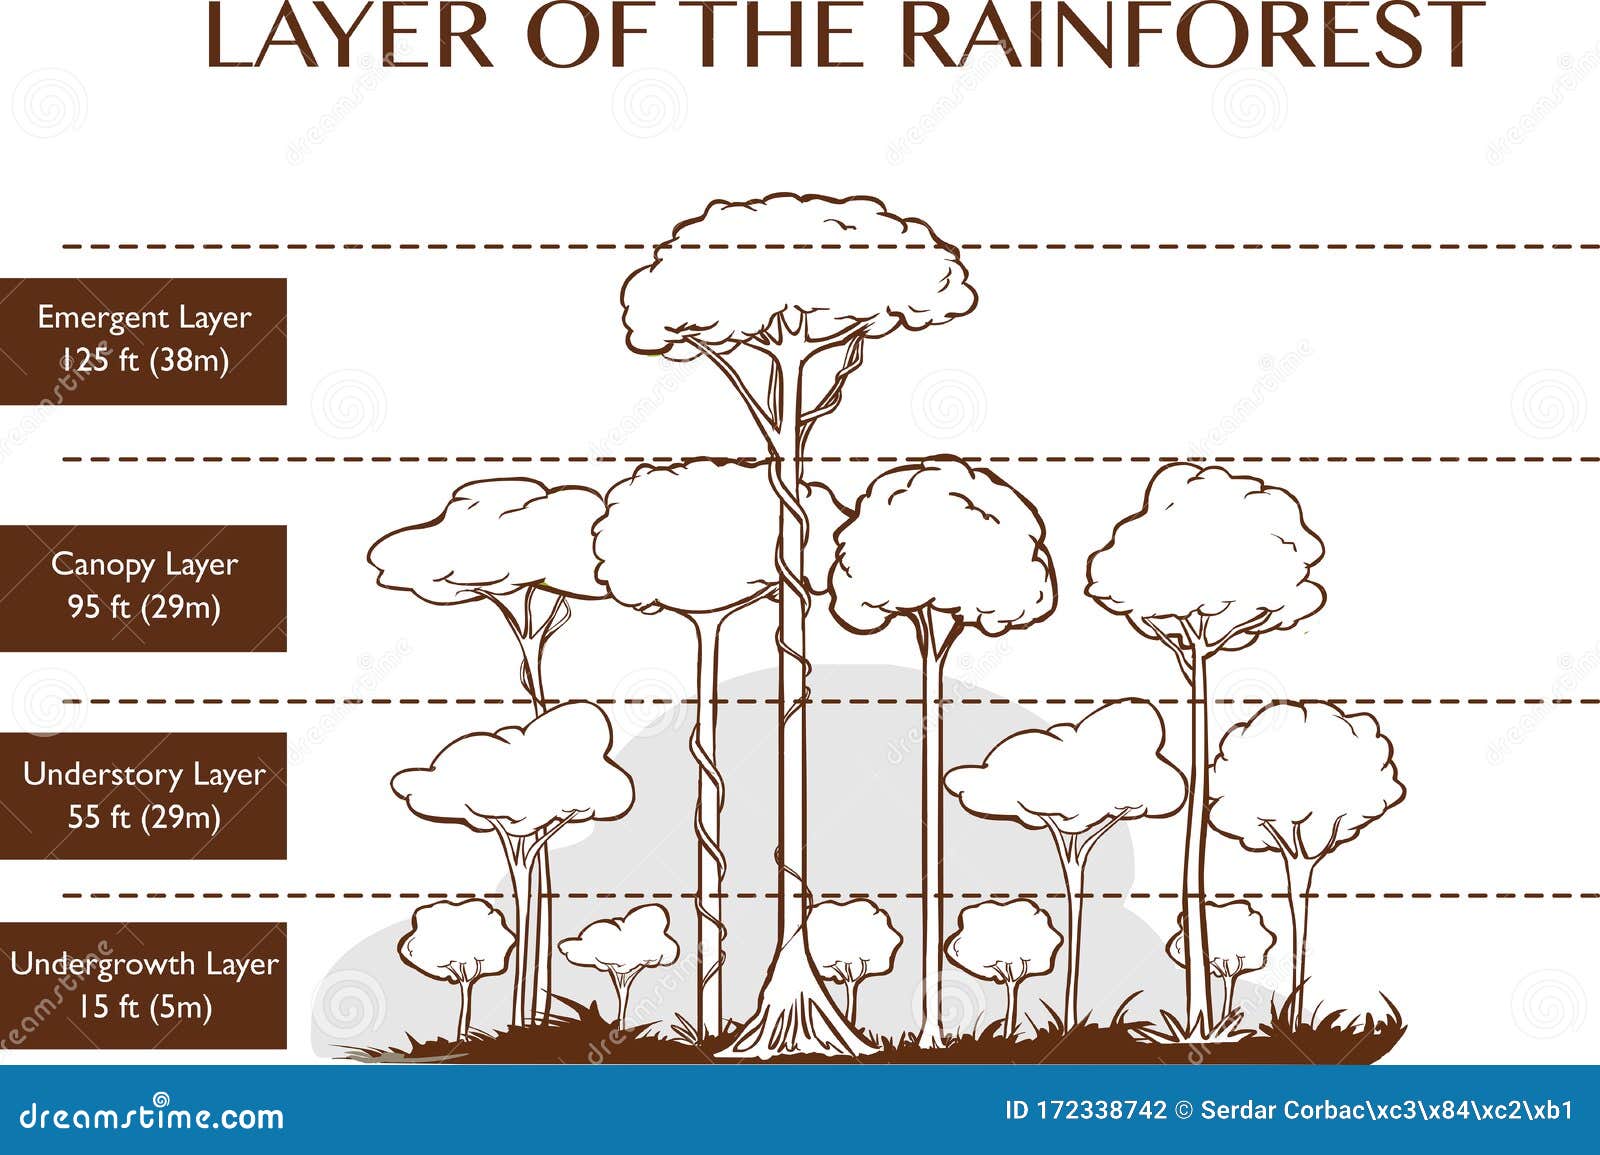   of the rainforest layers